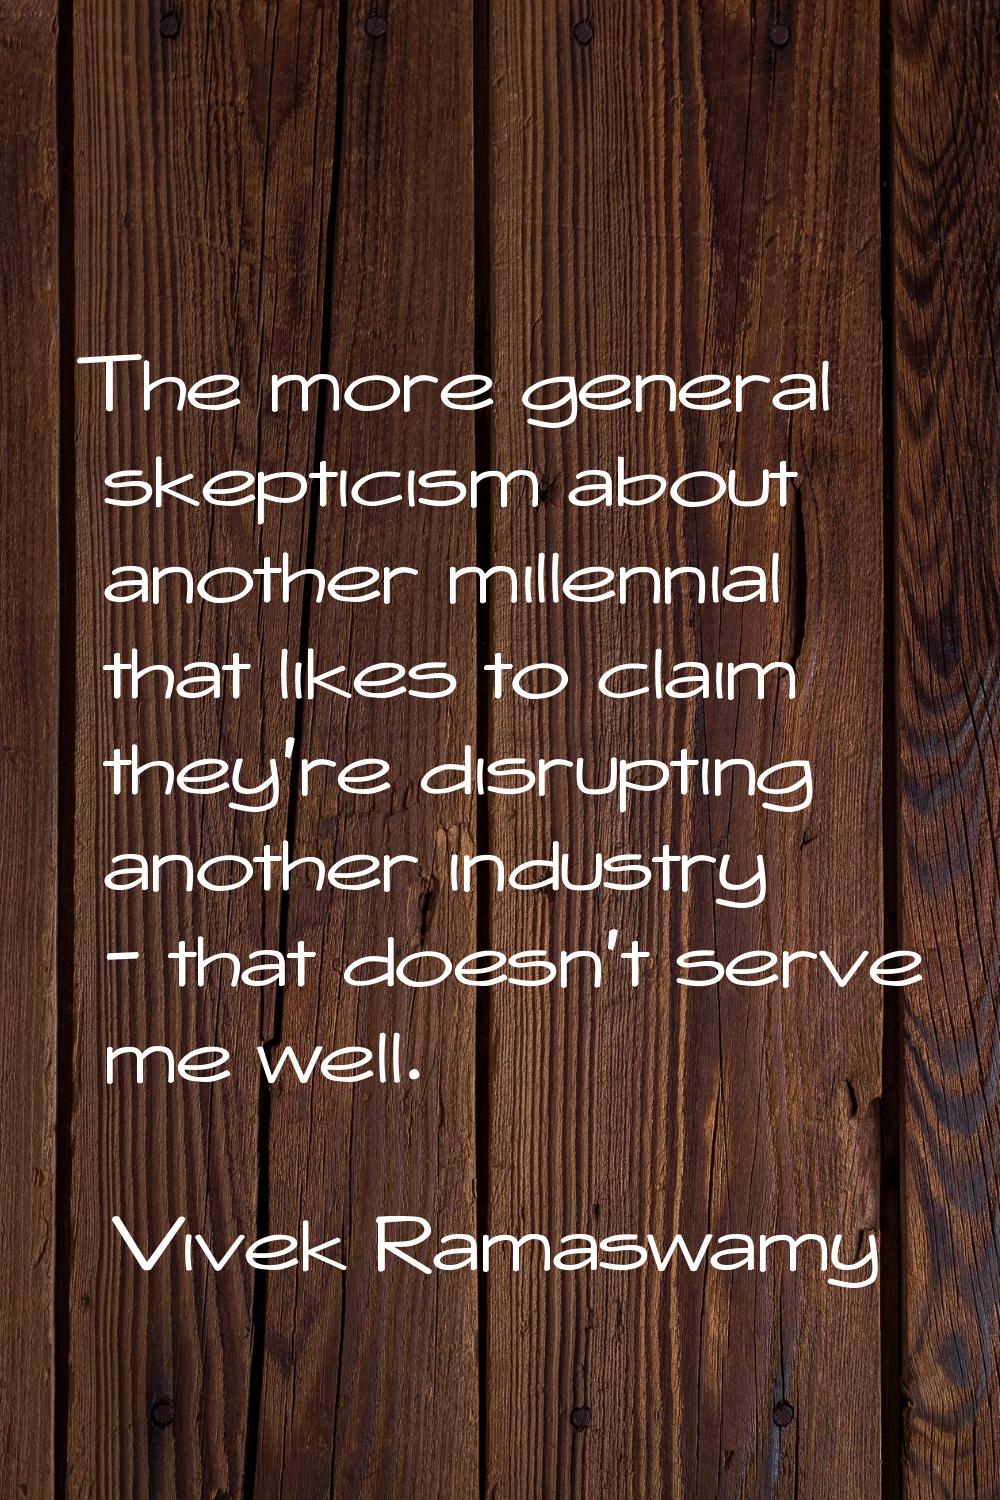 The more general skepticism about another millennial that likes to claim they're disrupting another